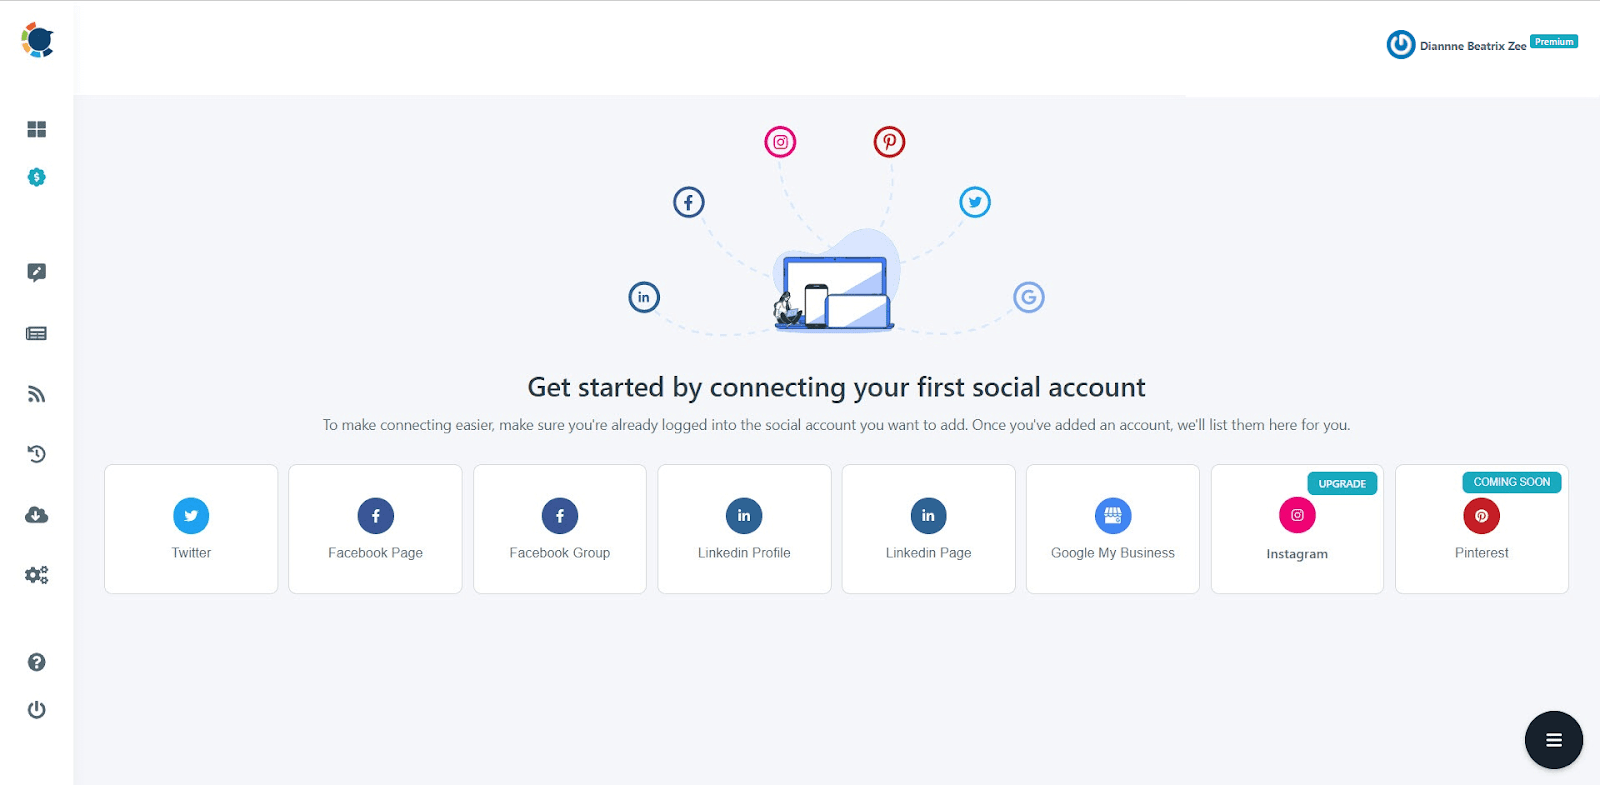 You can manage your accounts on major social media tools.